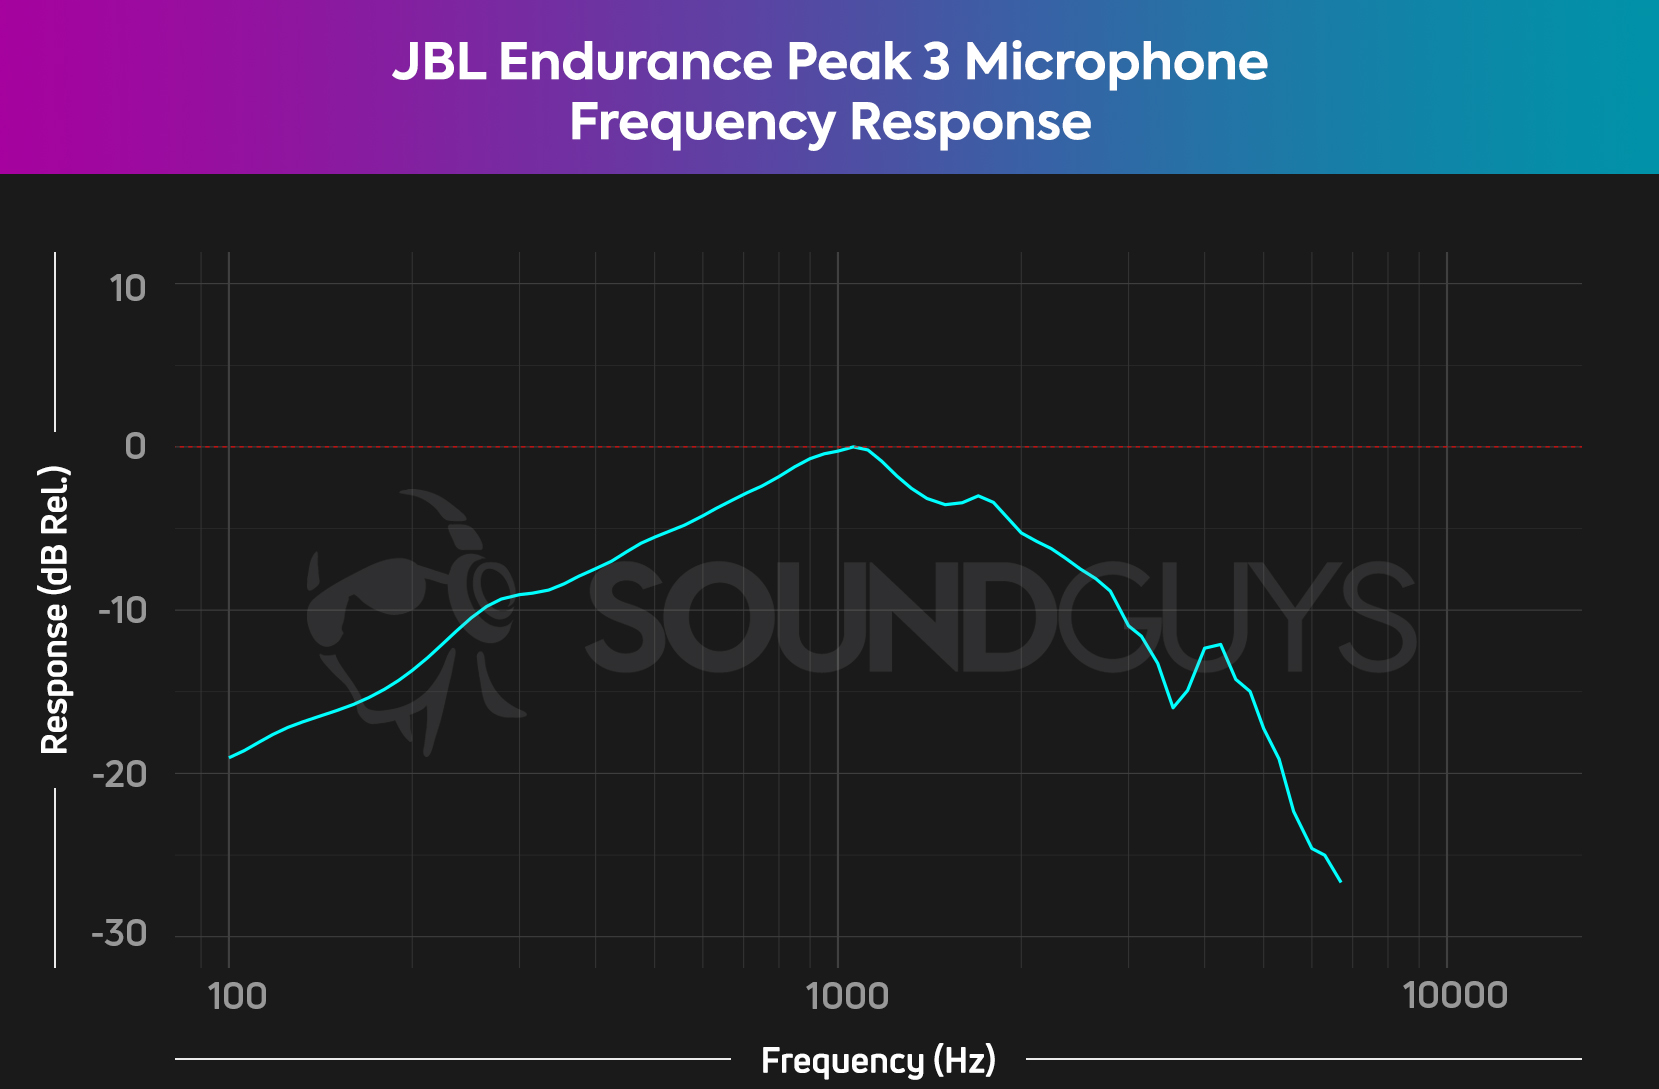 A chart showing the microphone frequency response of the JBL Endurance Peak 3